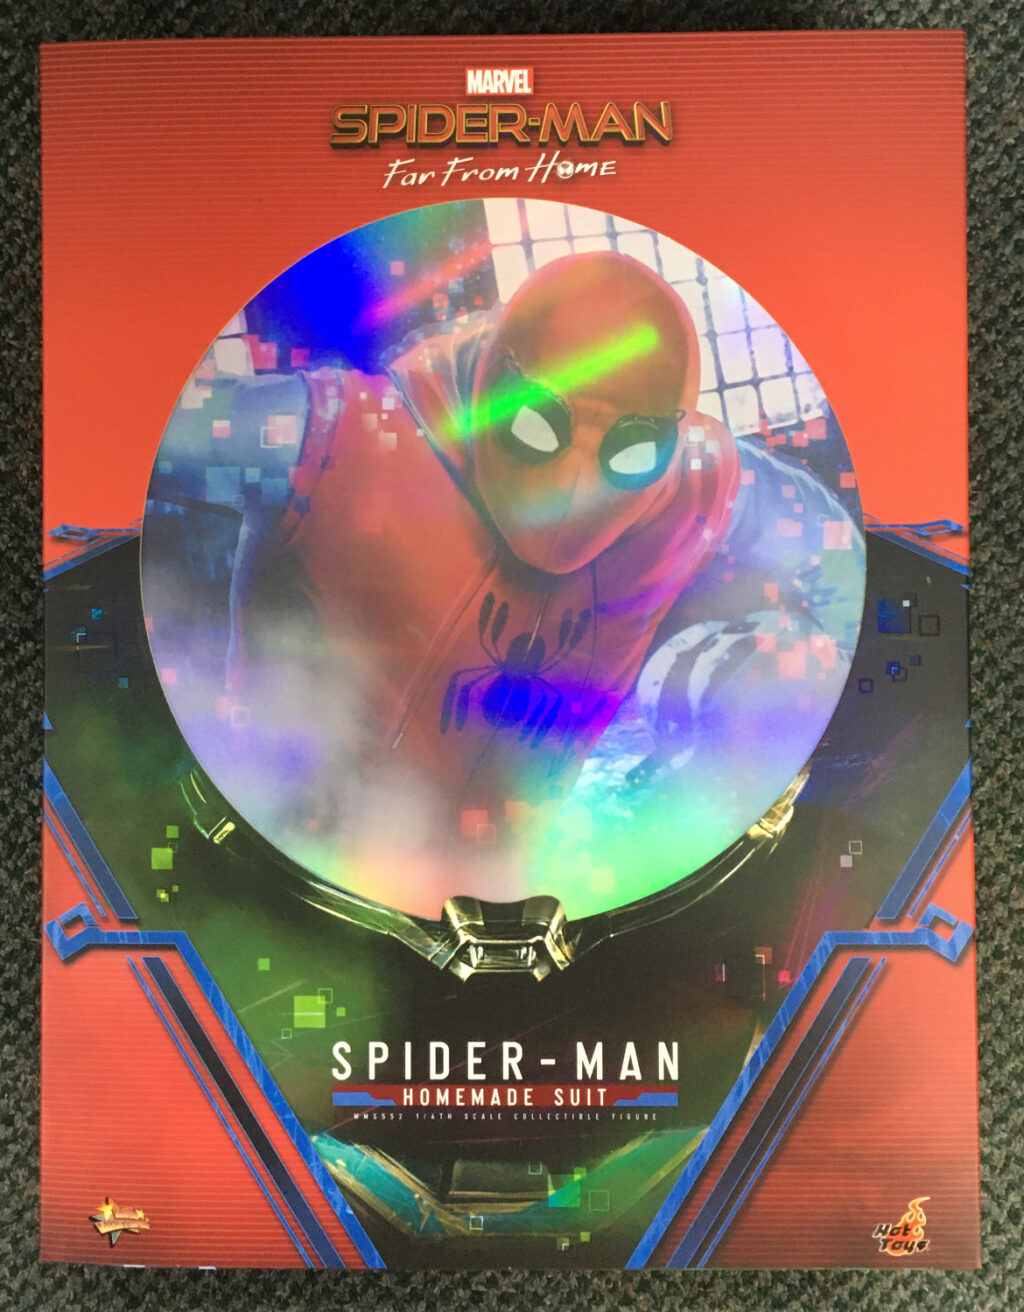 hot toys spider-man far from home homemade suit 1:6 scale figure 1